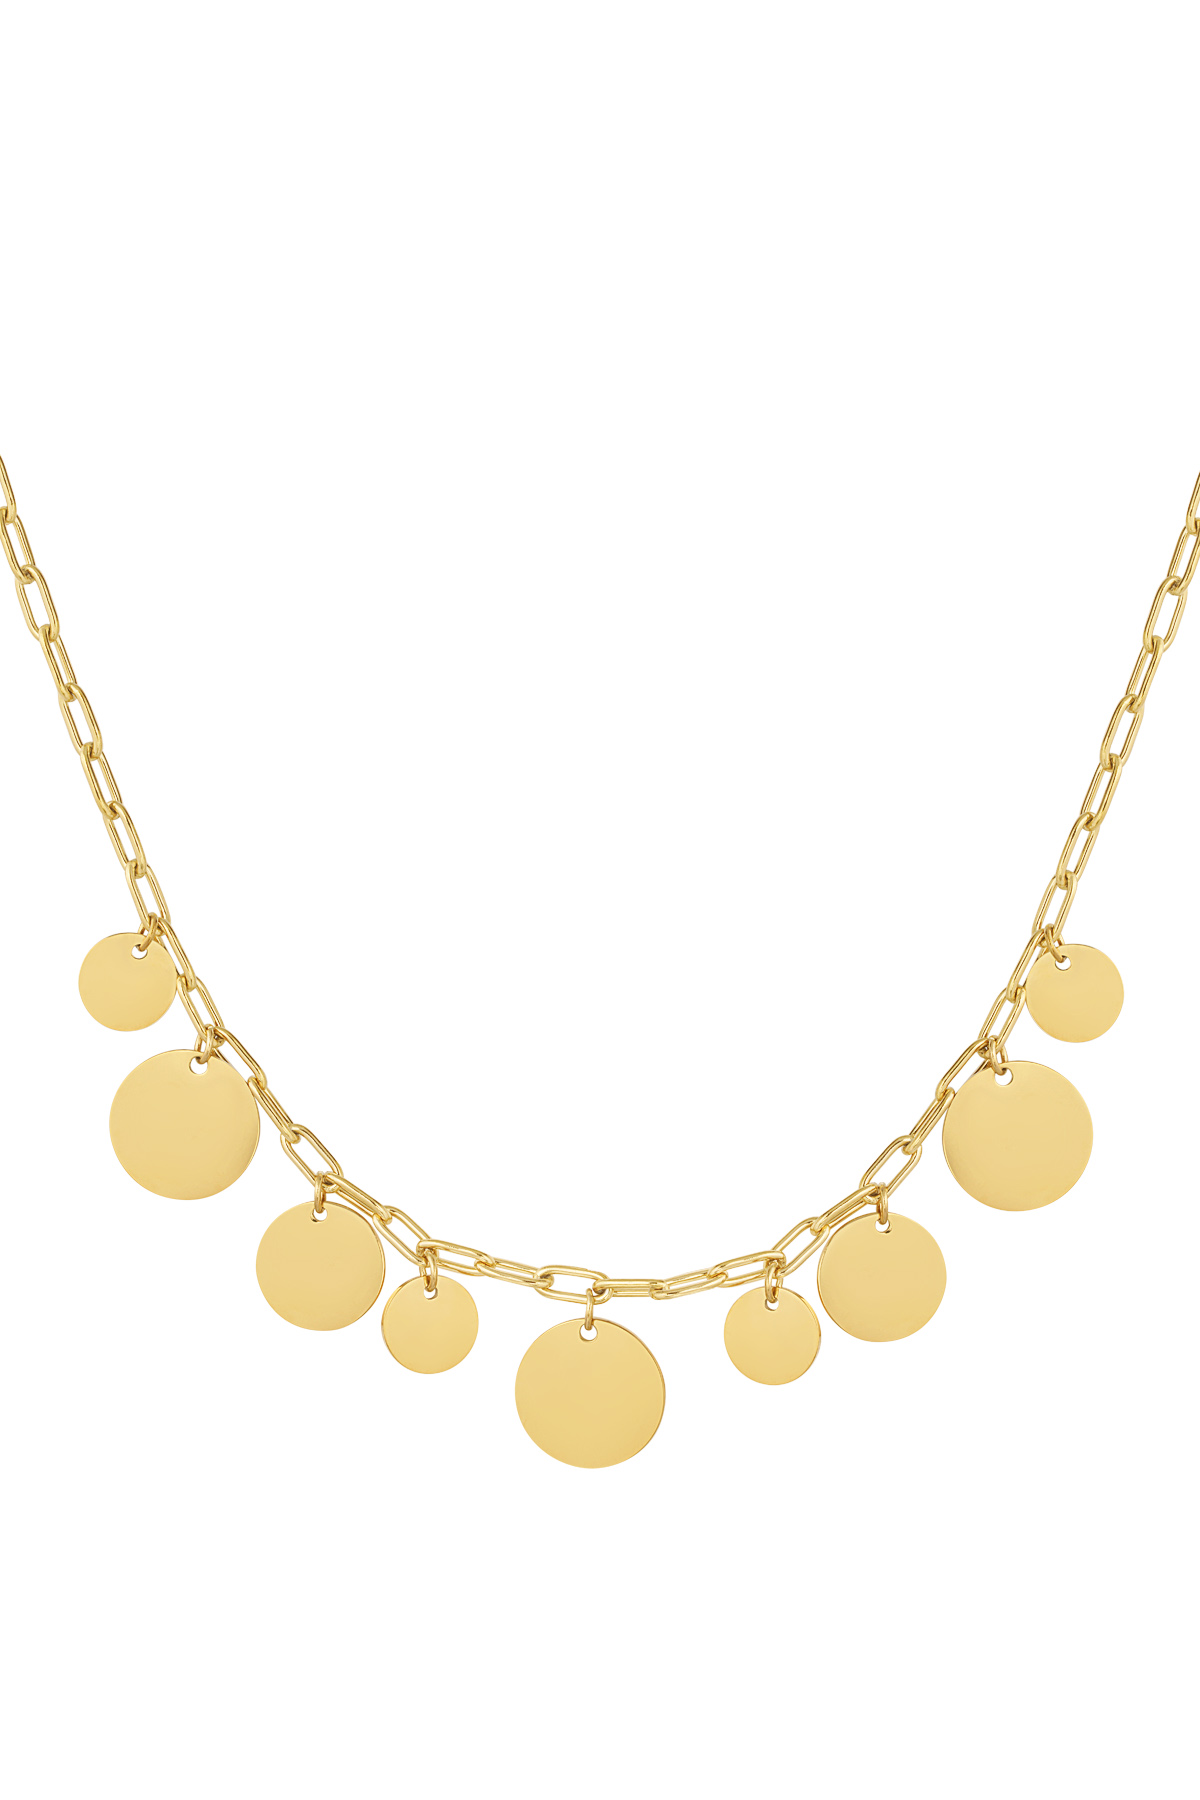 Link chain with circles - gold